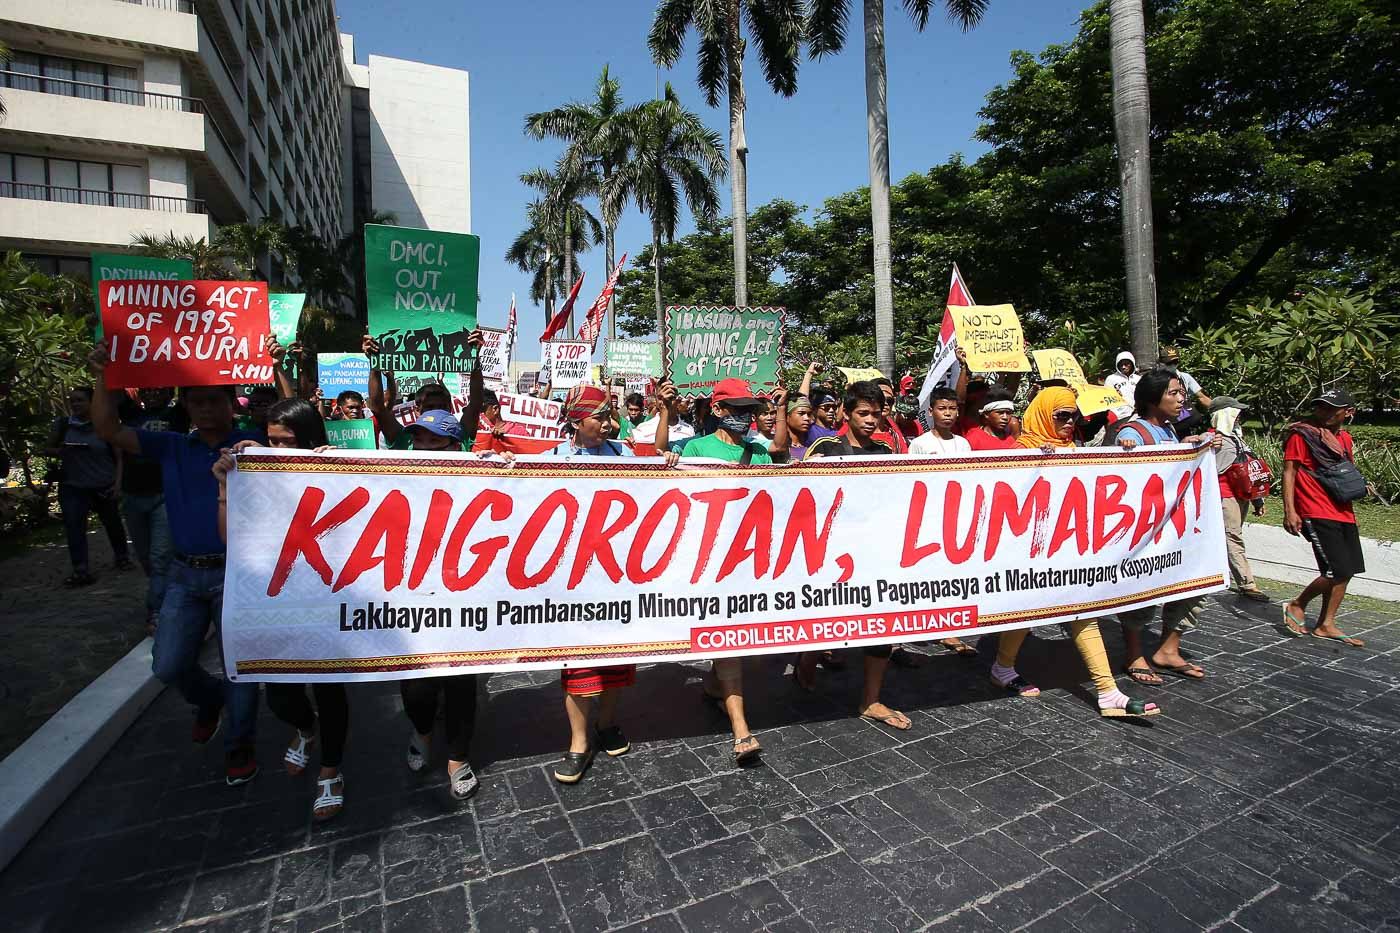 IN PHOTOS: Indigenous groups protest outside mining conference